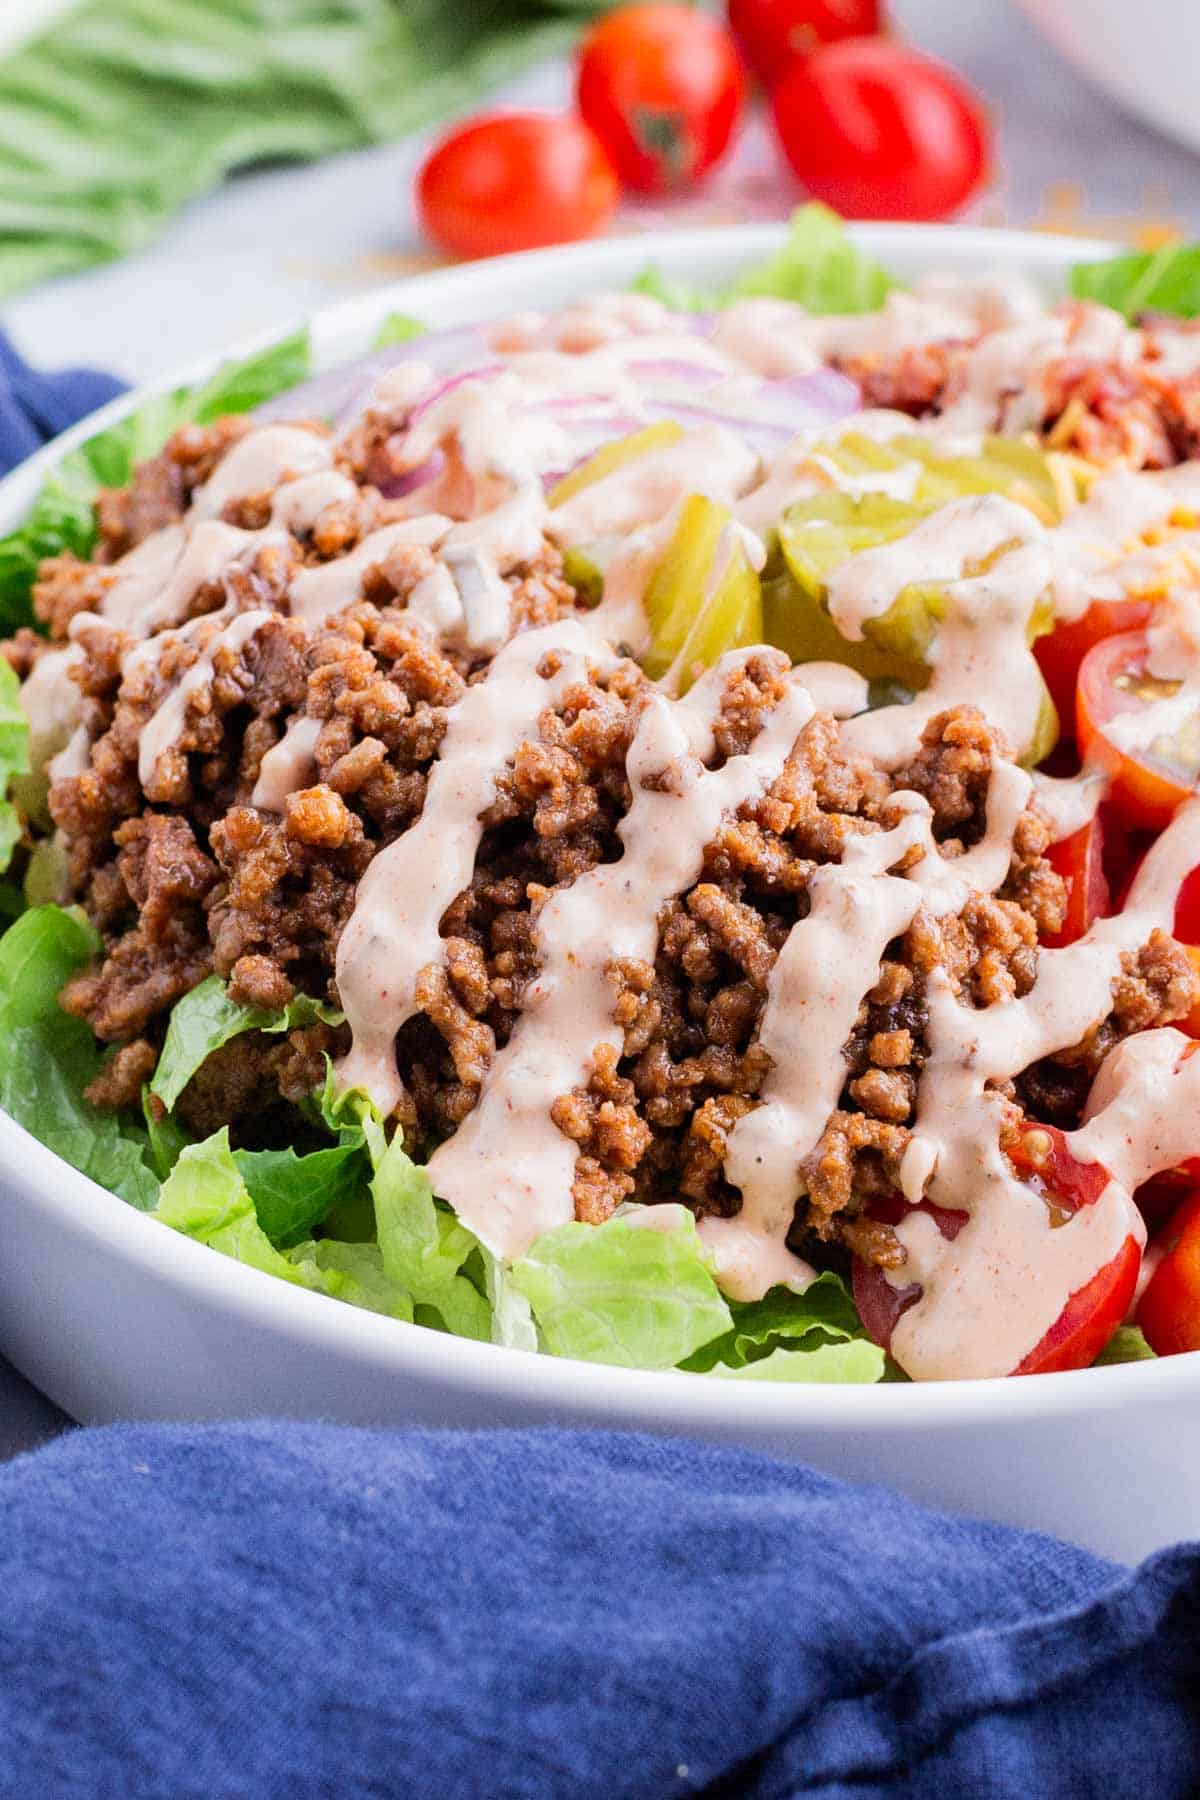 A burger bowl is topped with drizzled secret sauce.